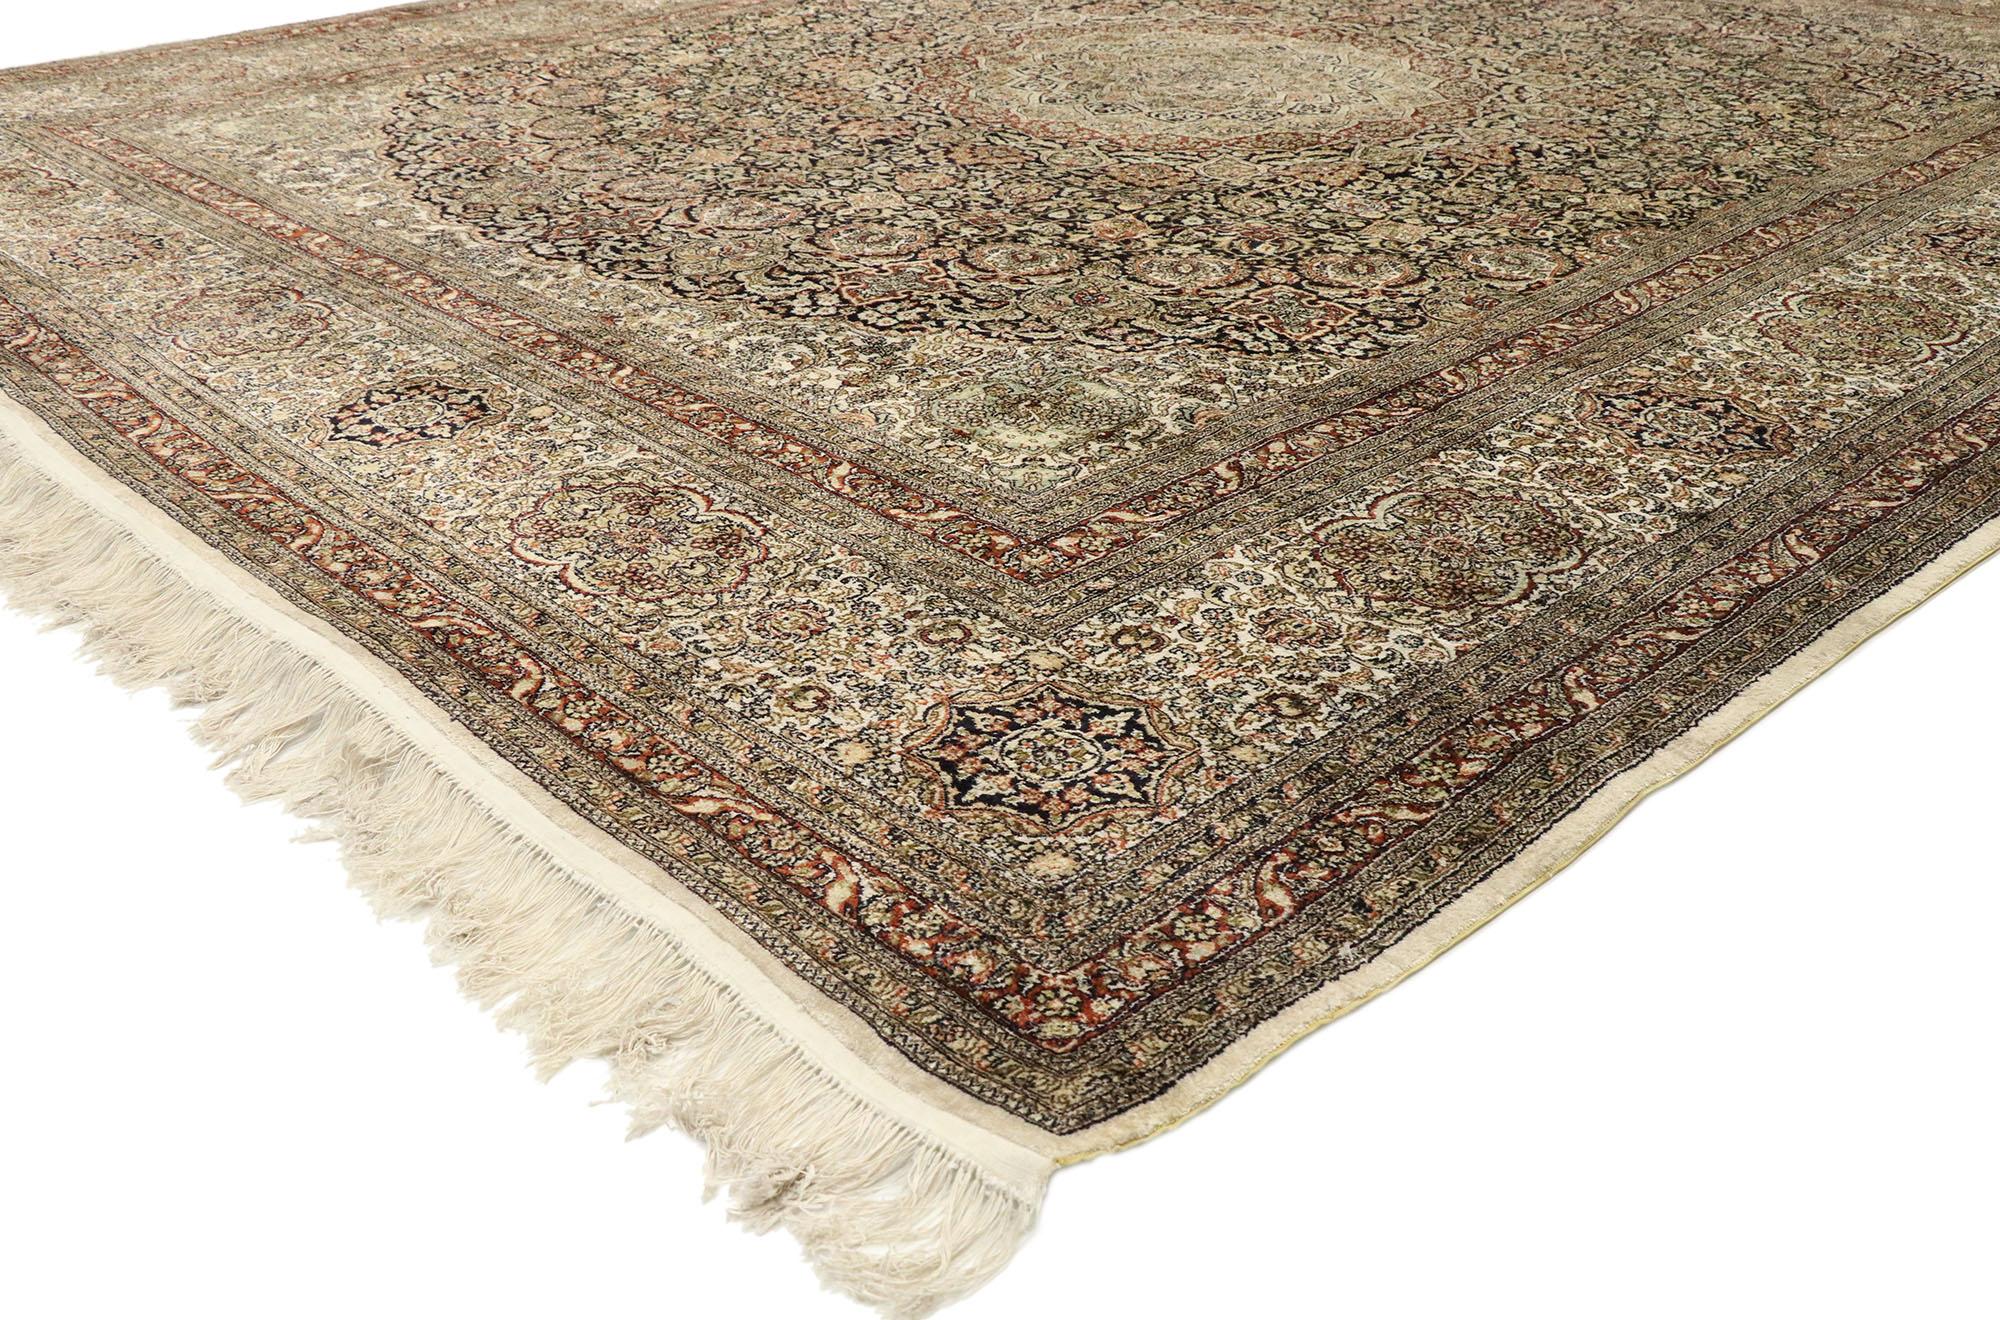 77475, vintage Turkish silk Hereke rug with Art Nouveau Rococo style. With ornate details and well-balanced symmetry combined with a dreamy color palette, this hand knotted silk vintage Turkish Hereke area rug beautifully embodies both Art Nouveau